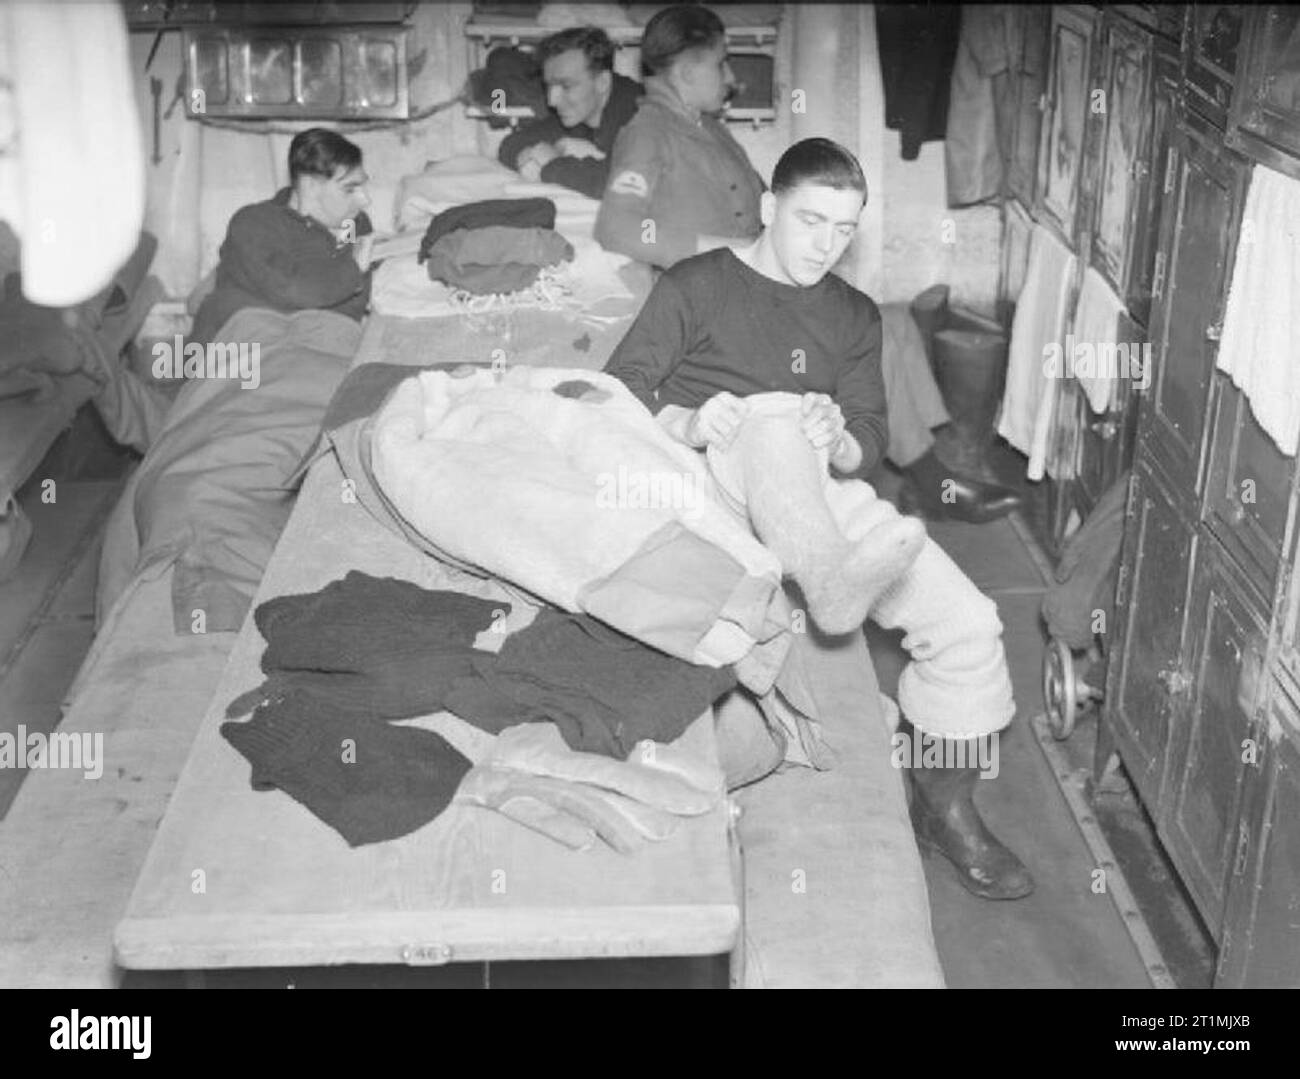 Convoy To Russia, With a British Cruiser Escort on Arctic Lifeline. December 1941, on Board the Cruiser HMS Sheffield. Taking convoys to Arctic Russia in December is a cold job and all personnel obliged to keep watches in the open are issued with arctic clothing to wear in addition to the comforts they already have. Here is a look-out preparing to go on watch. He has a sheepskin great-coat, sheepskin gloves, two balaclavas, thick woollen pants, two pairs of seaboot stockings and pullovers. Stock Photo